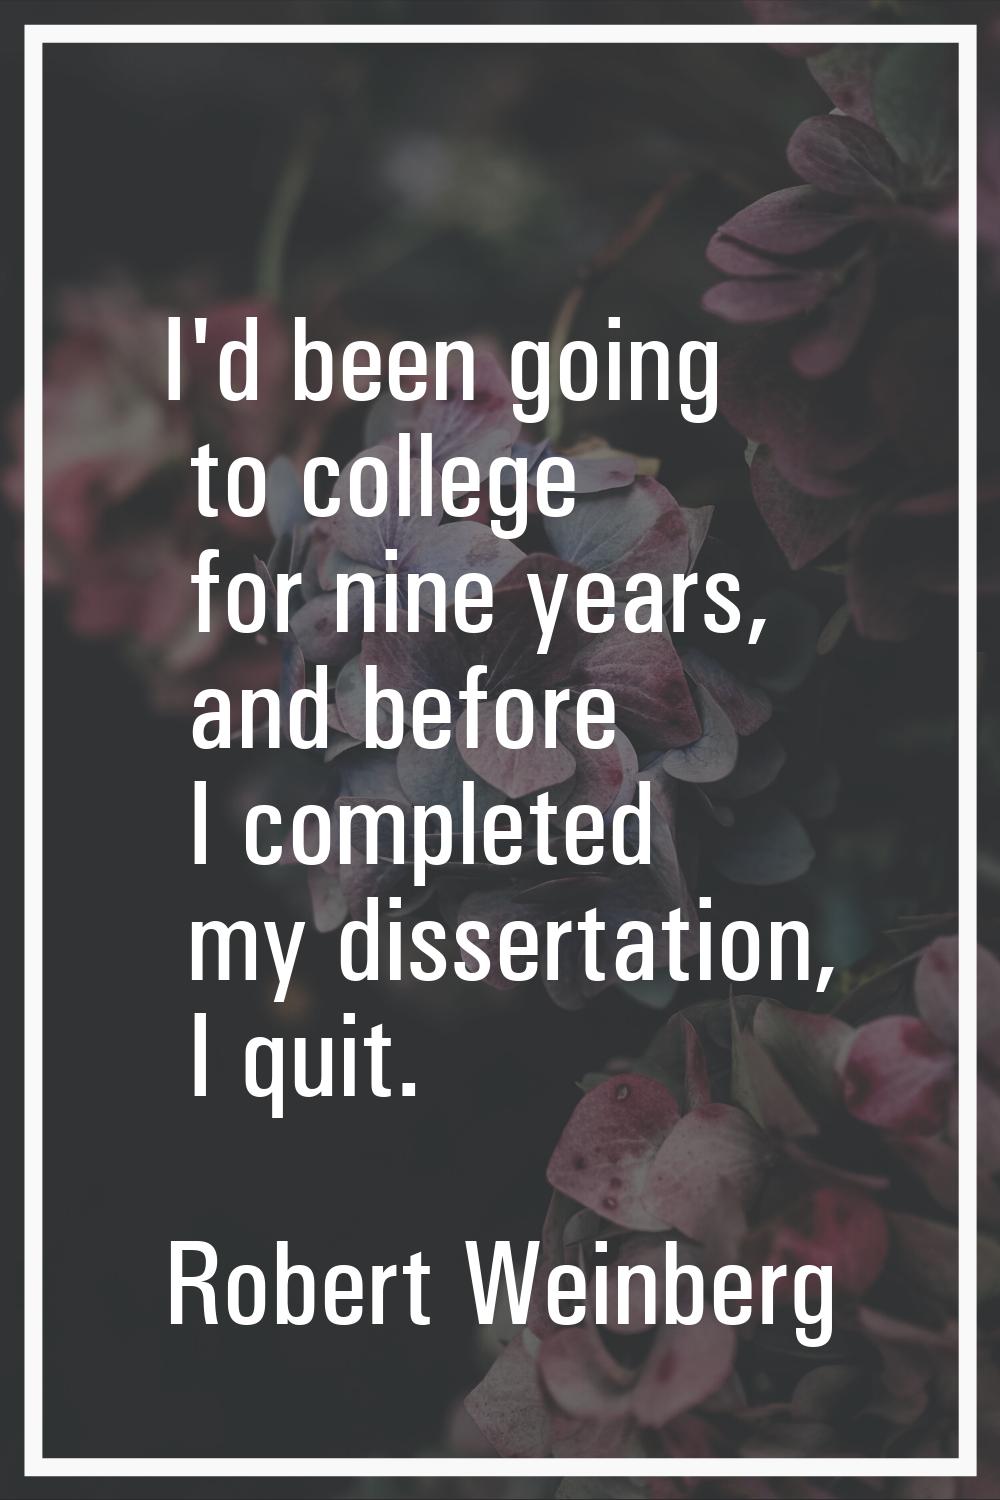 I'd been going to college for nine years, and before I completed my dissertation, I quit.